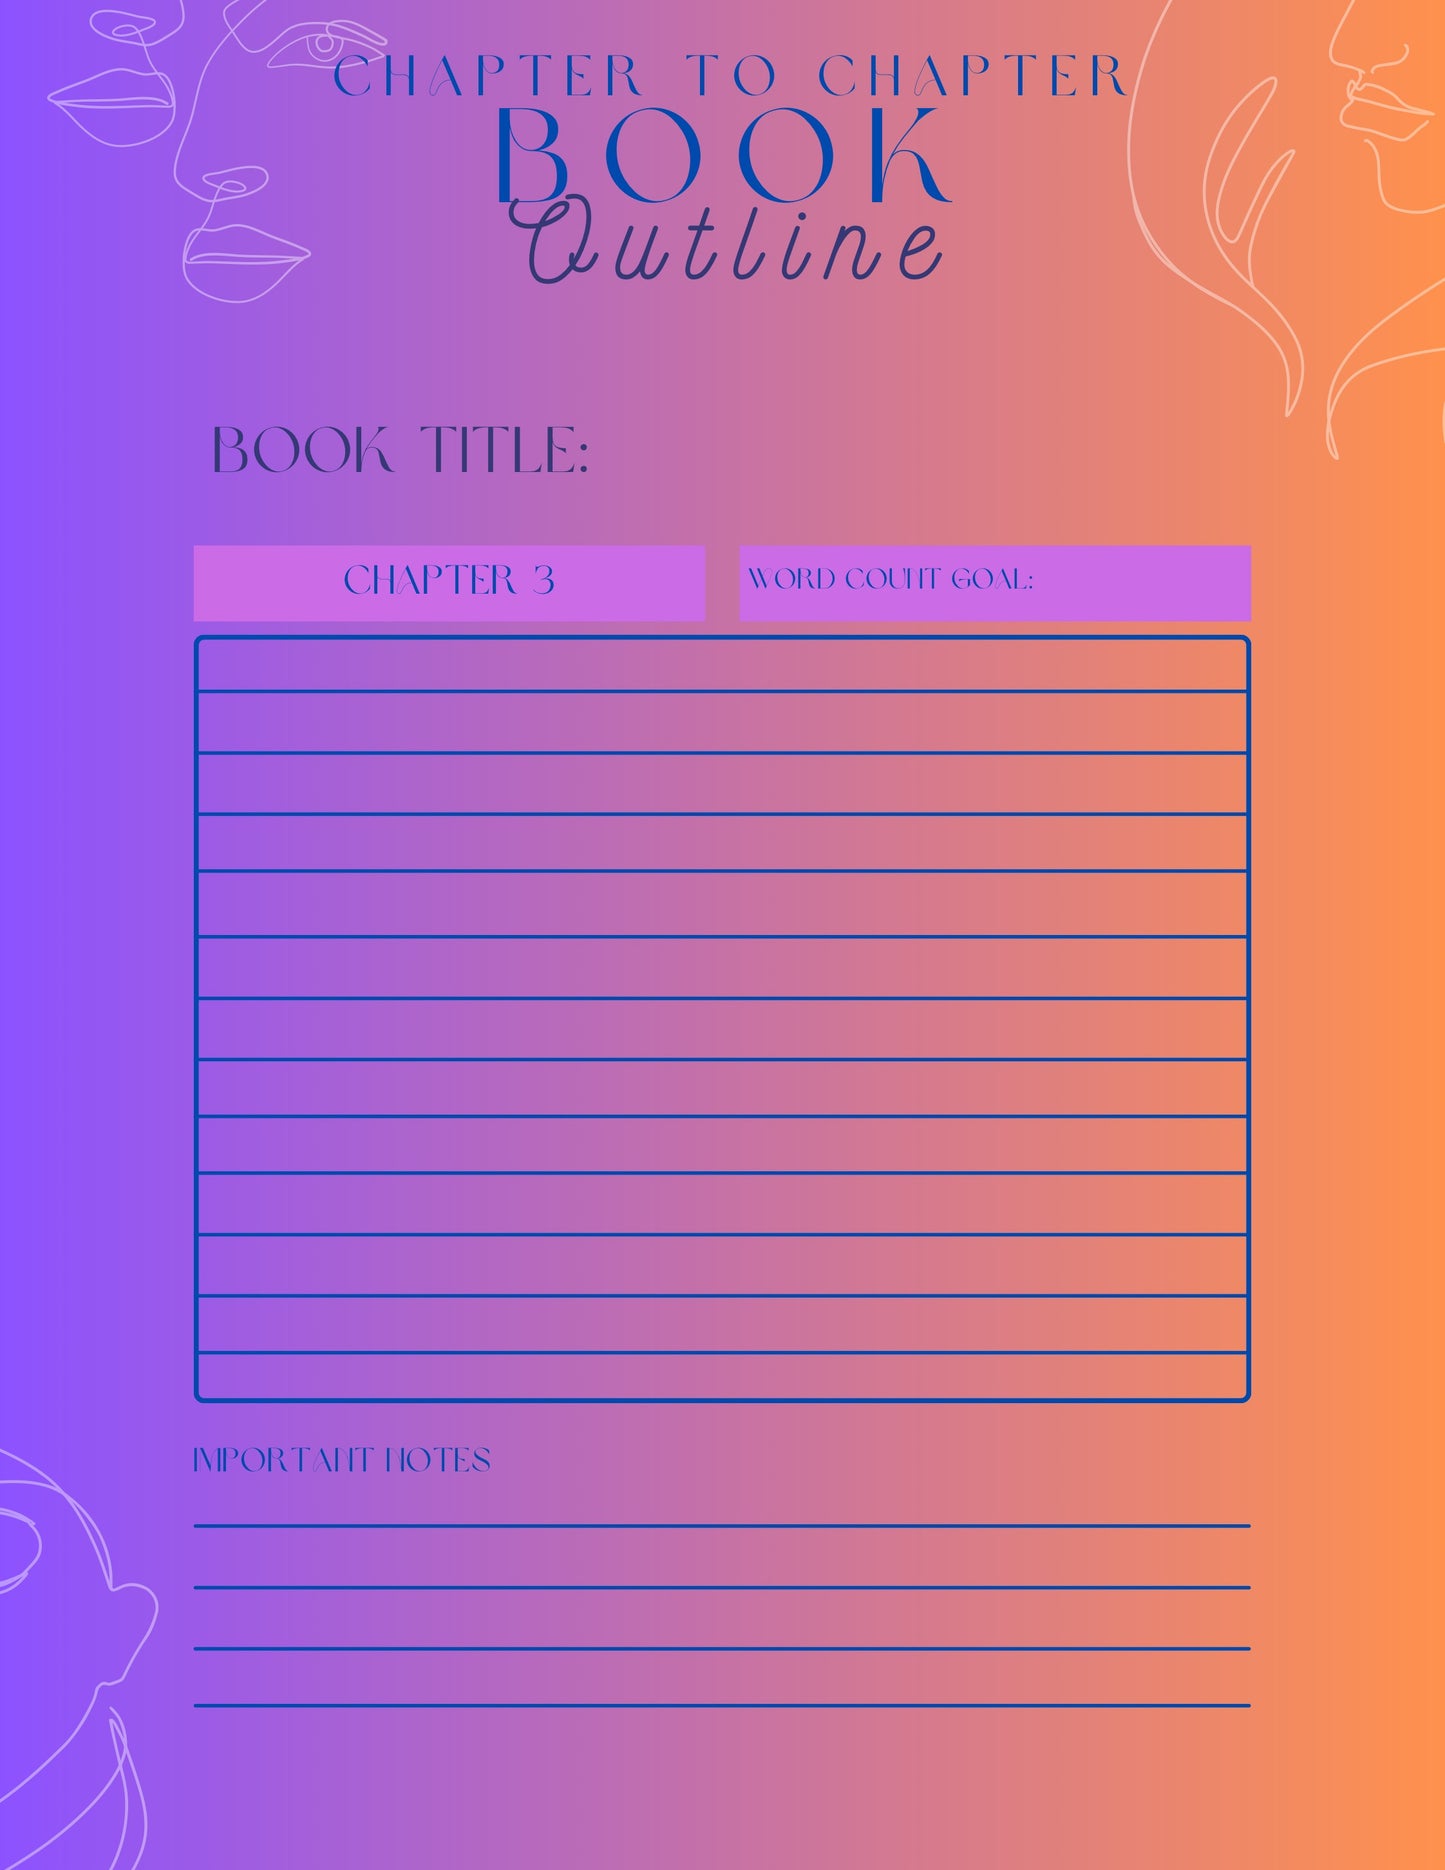 Chapter to Chapter Outline Template